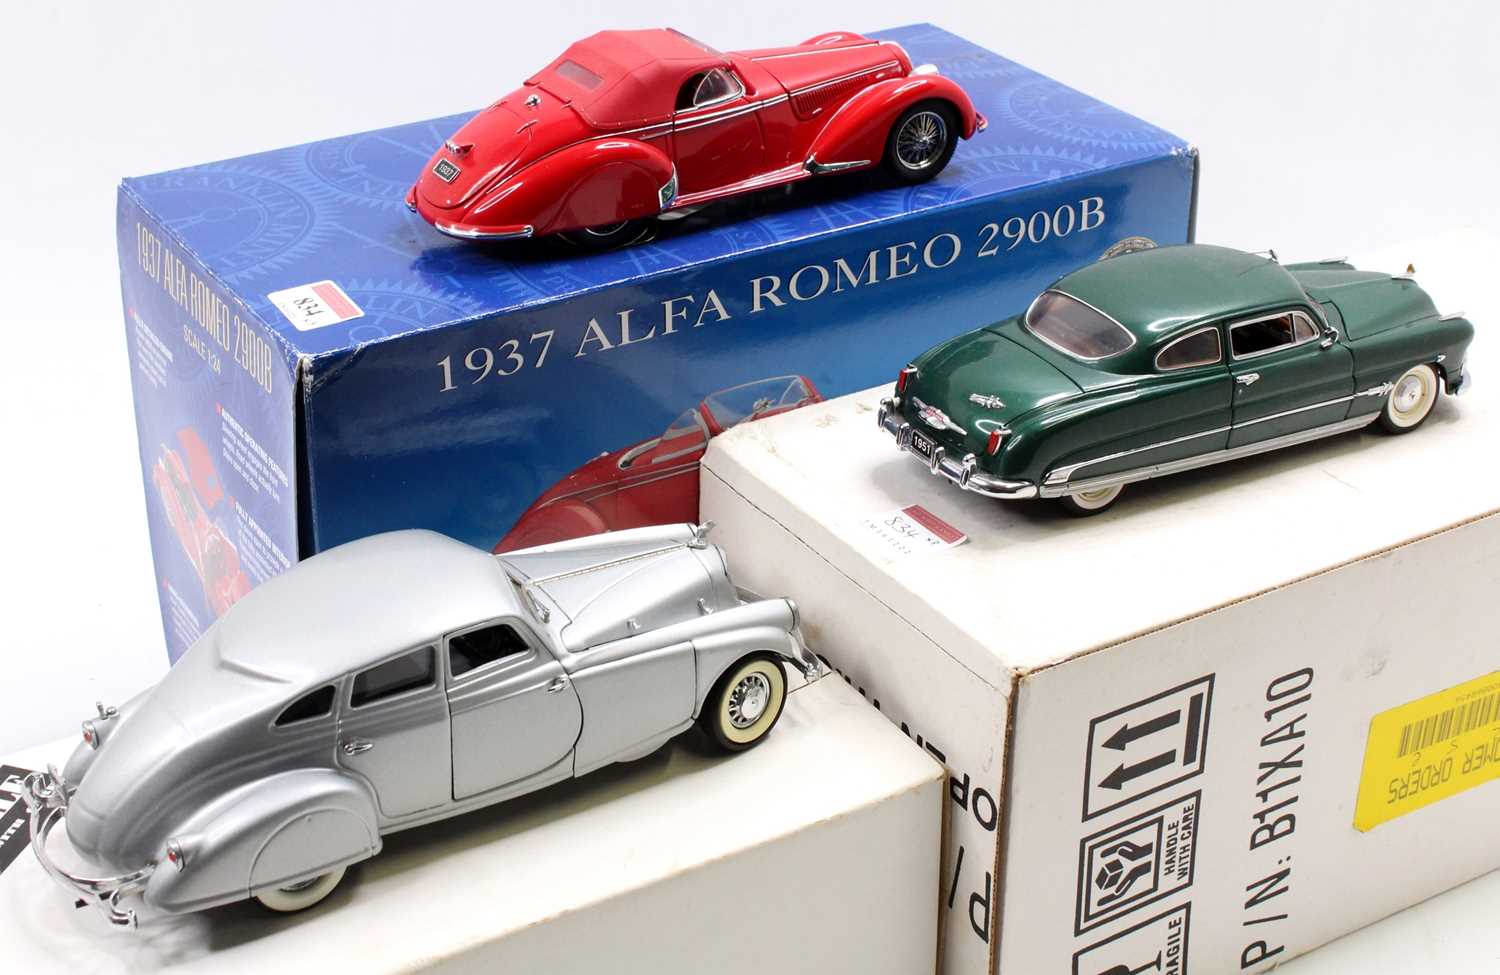 A Franklin Mint 1/24 scale boxed diecast group to include a 1937 Alfa Romeo 2900B saloon finished in - Image 2 of 2